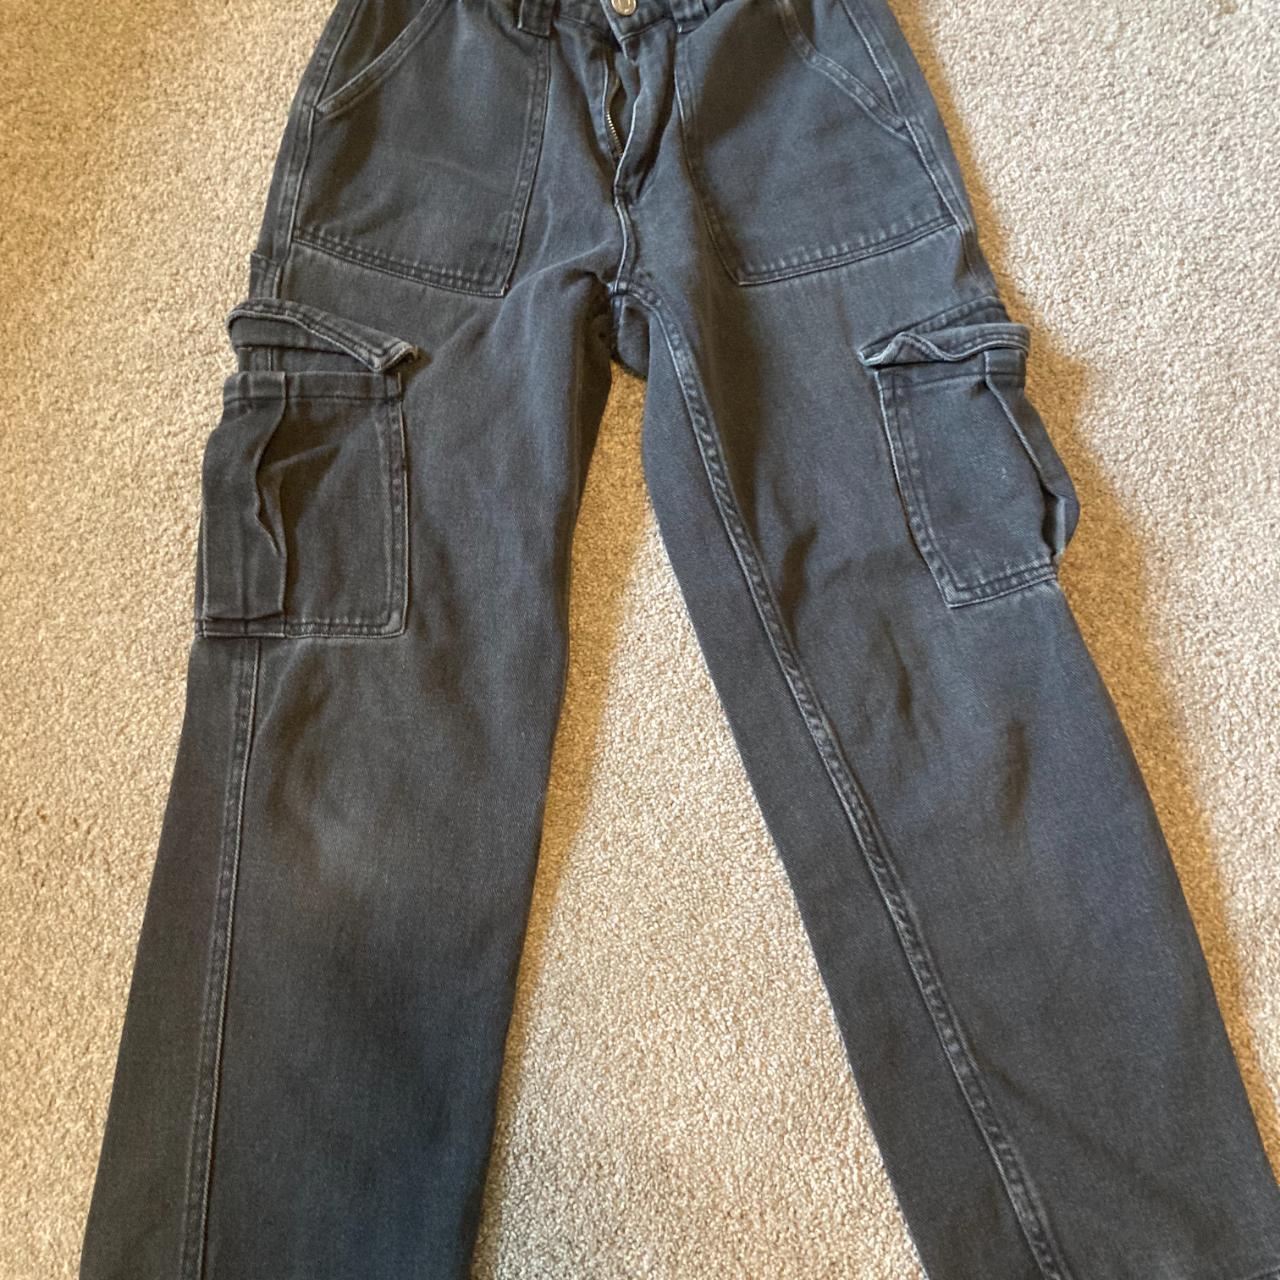 Women's Pacsun black baggy cargo pants -These are so... - Depop